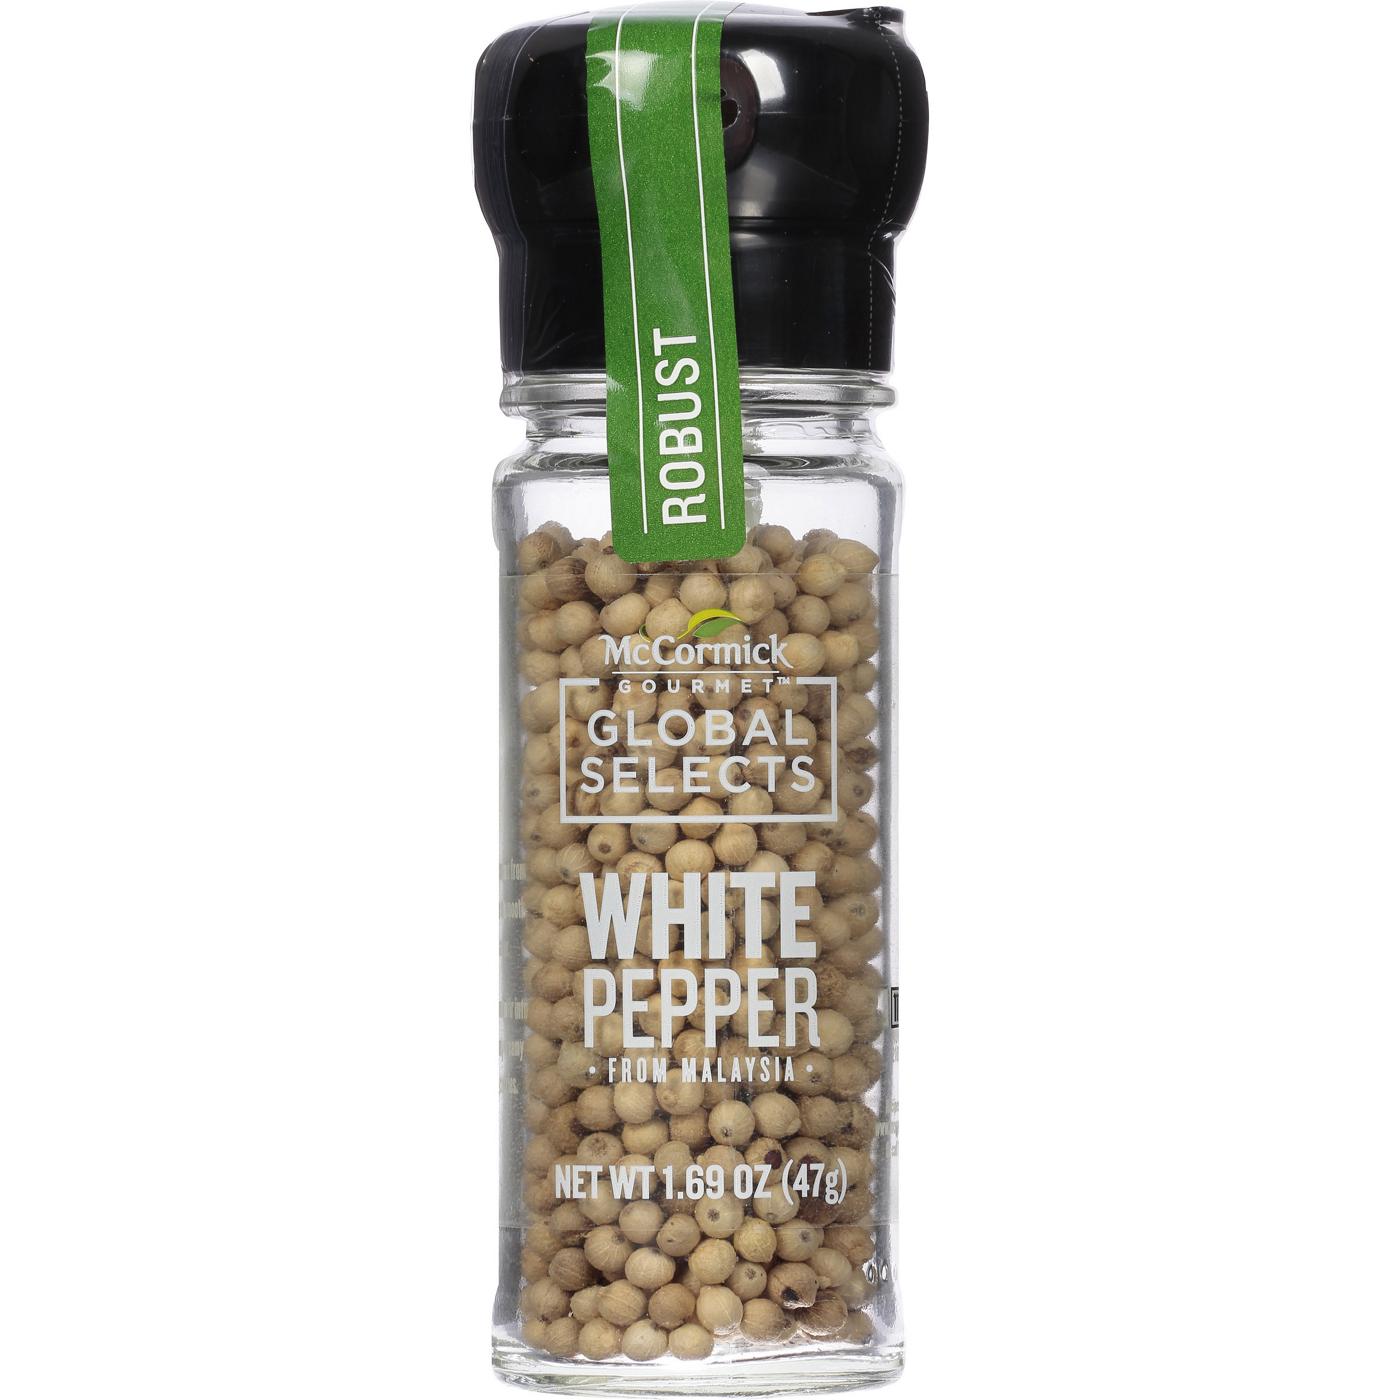 McCormick Gourmet Global Selects White Pepper from Malaysia; image 1 of 6